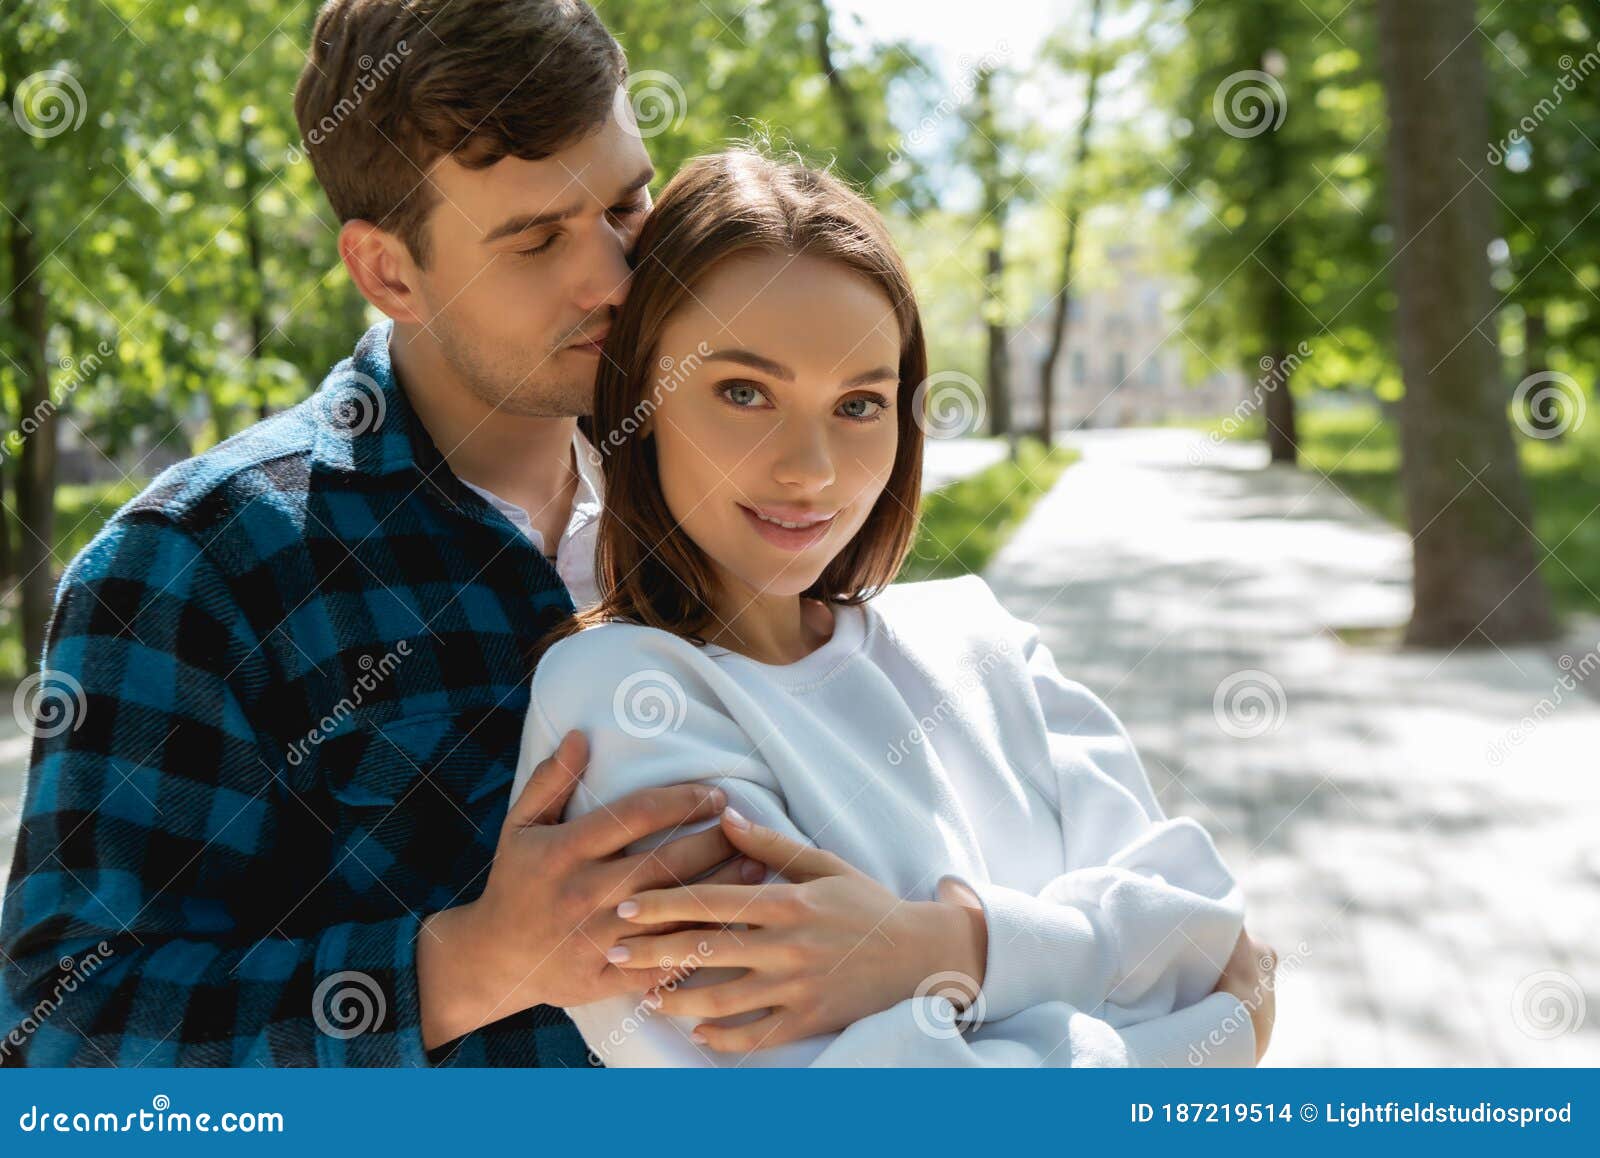 Student with Closed Eyes Embracing Beautiful Stock Photo - Image of ...